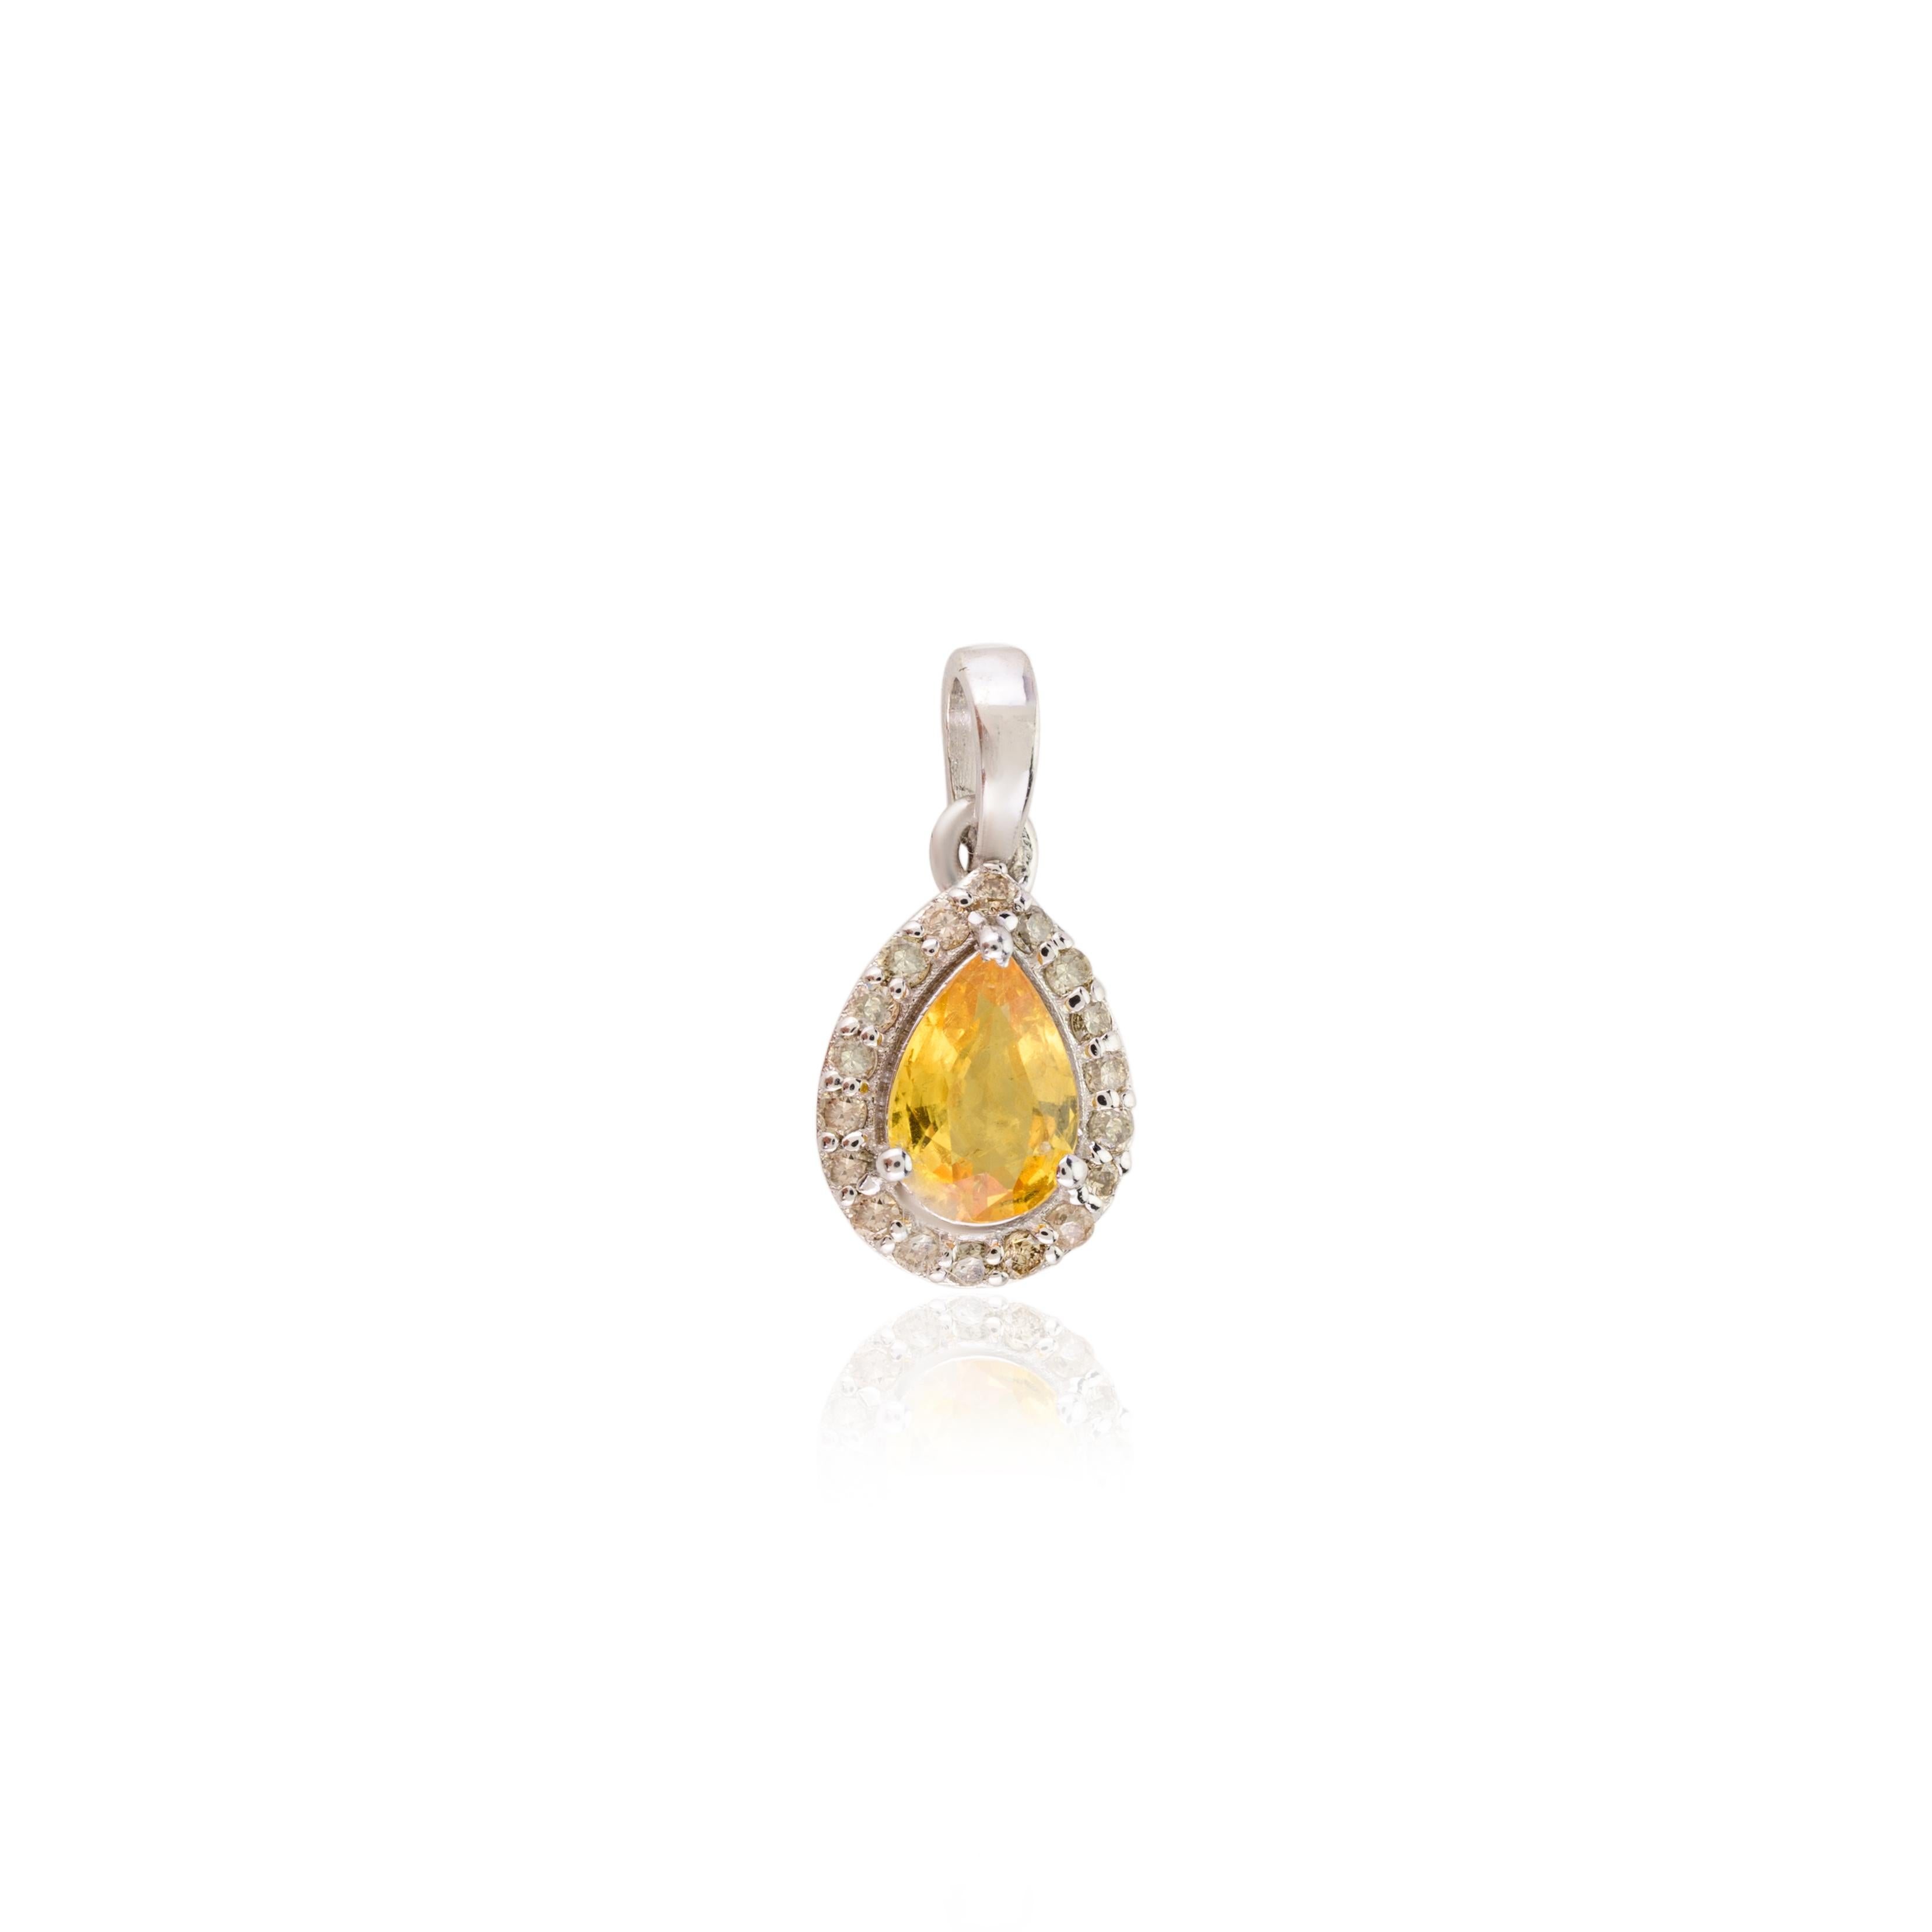 Everyday Yellow Sapphire Halo Diamond Pendant in 18K Gold studded with pear cut yellow sapphire and halo of diamonds. This stunning piece of jewelry instantly elevates a casual look or dressy outfit. 
Sapphire stimulates concentration and reduces